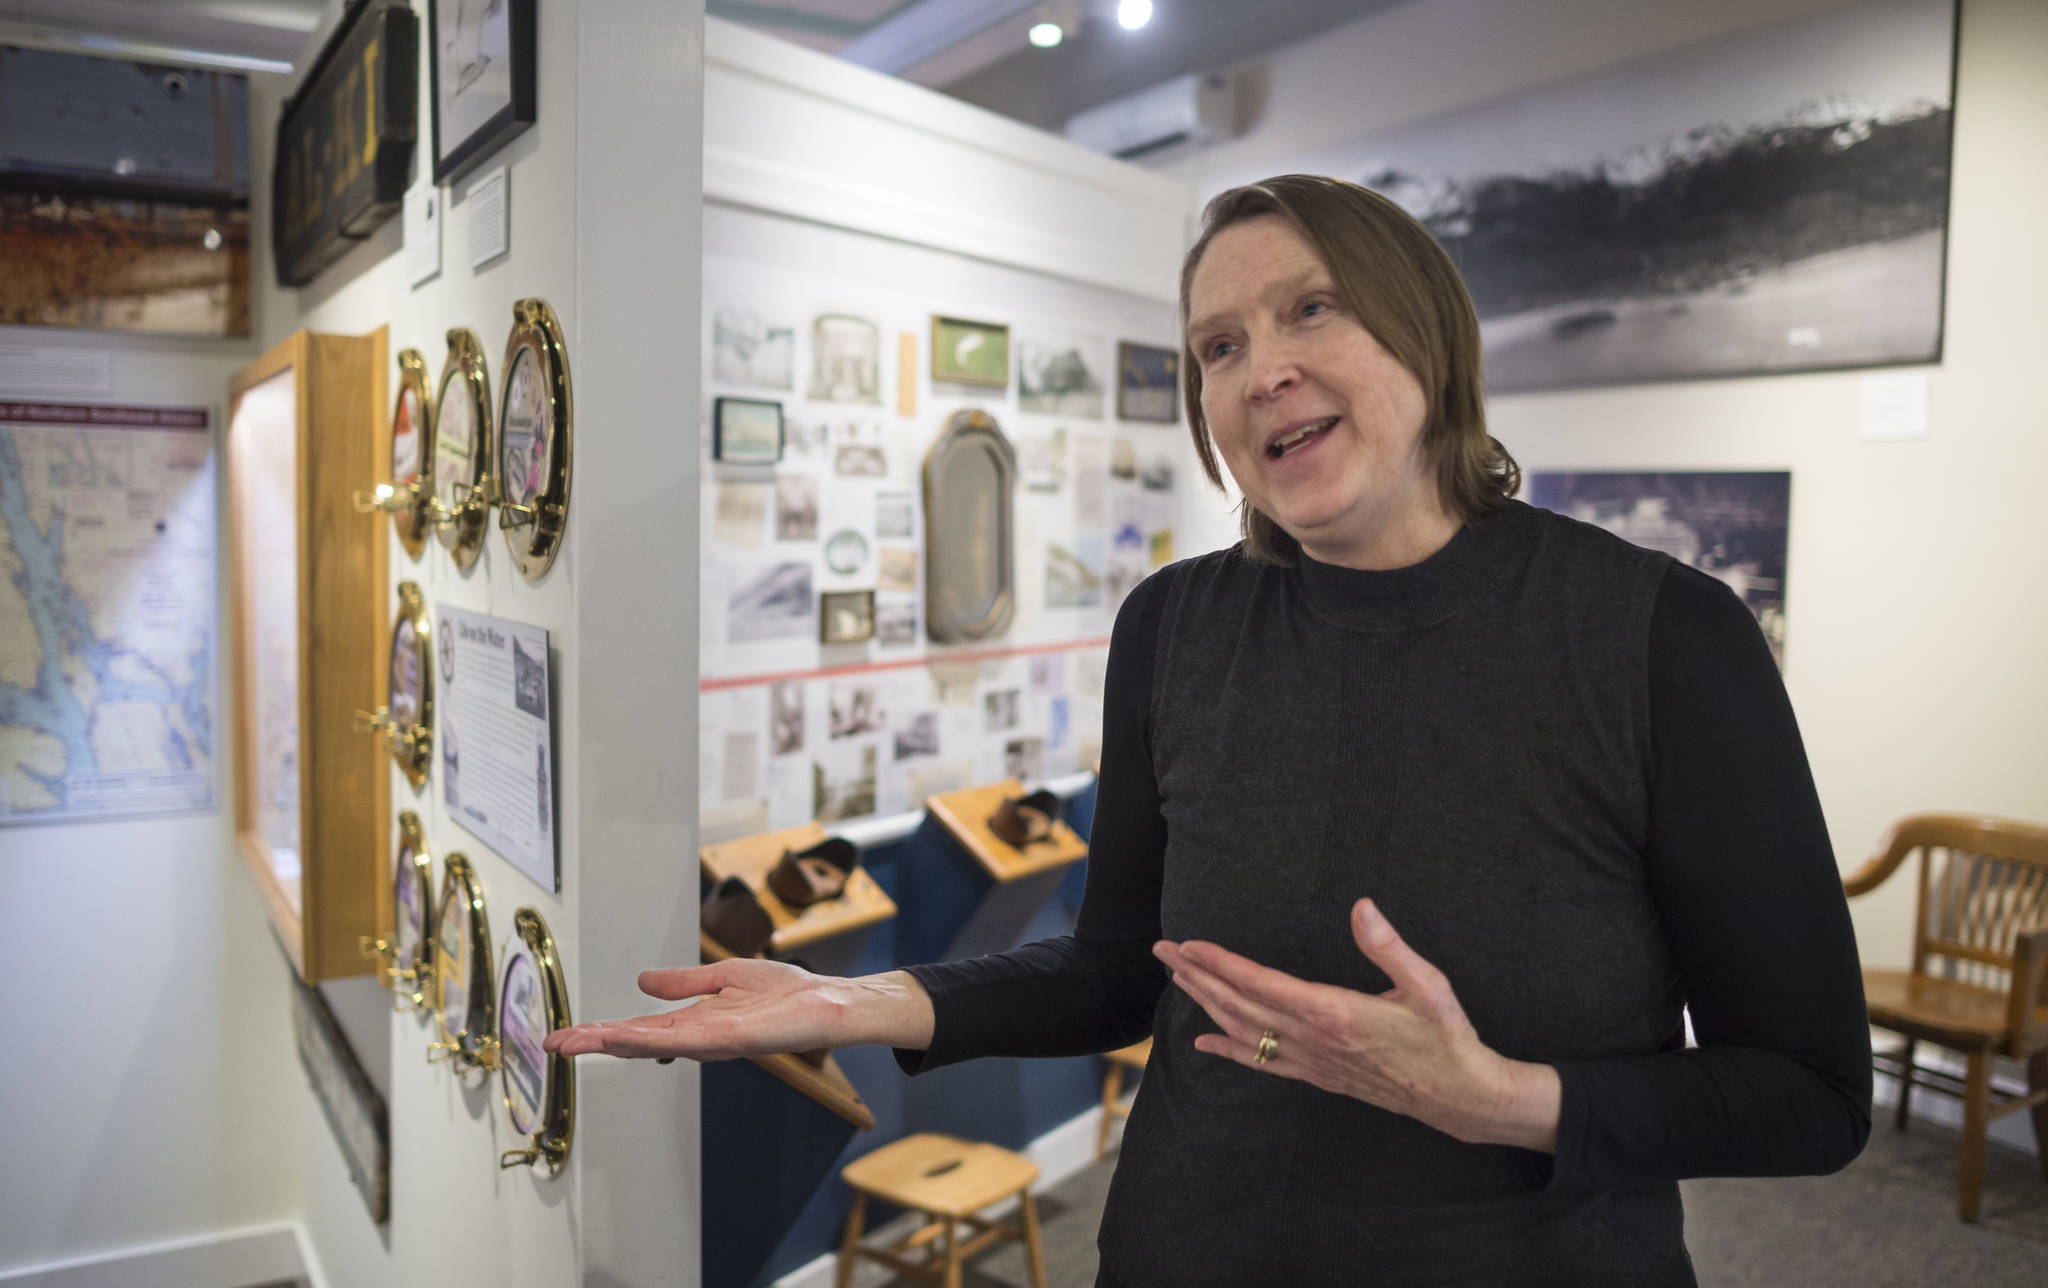 Jane Lindsey, director at Juneau-Douglas City Museum, talks on Tuesday, Feb. 6, 2018, about her upcoming retirement. Lindsey has worked at the museum for 18 years and has been the director since 2005. (Michael Penn | Juneau Empire)